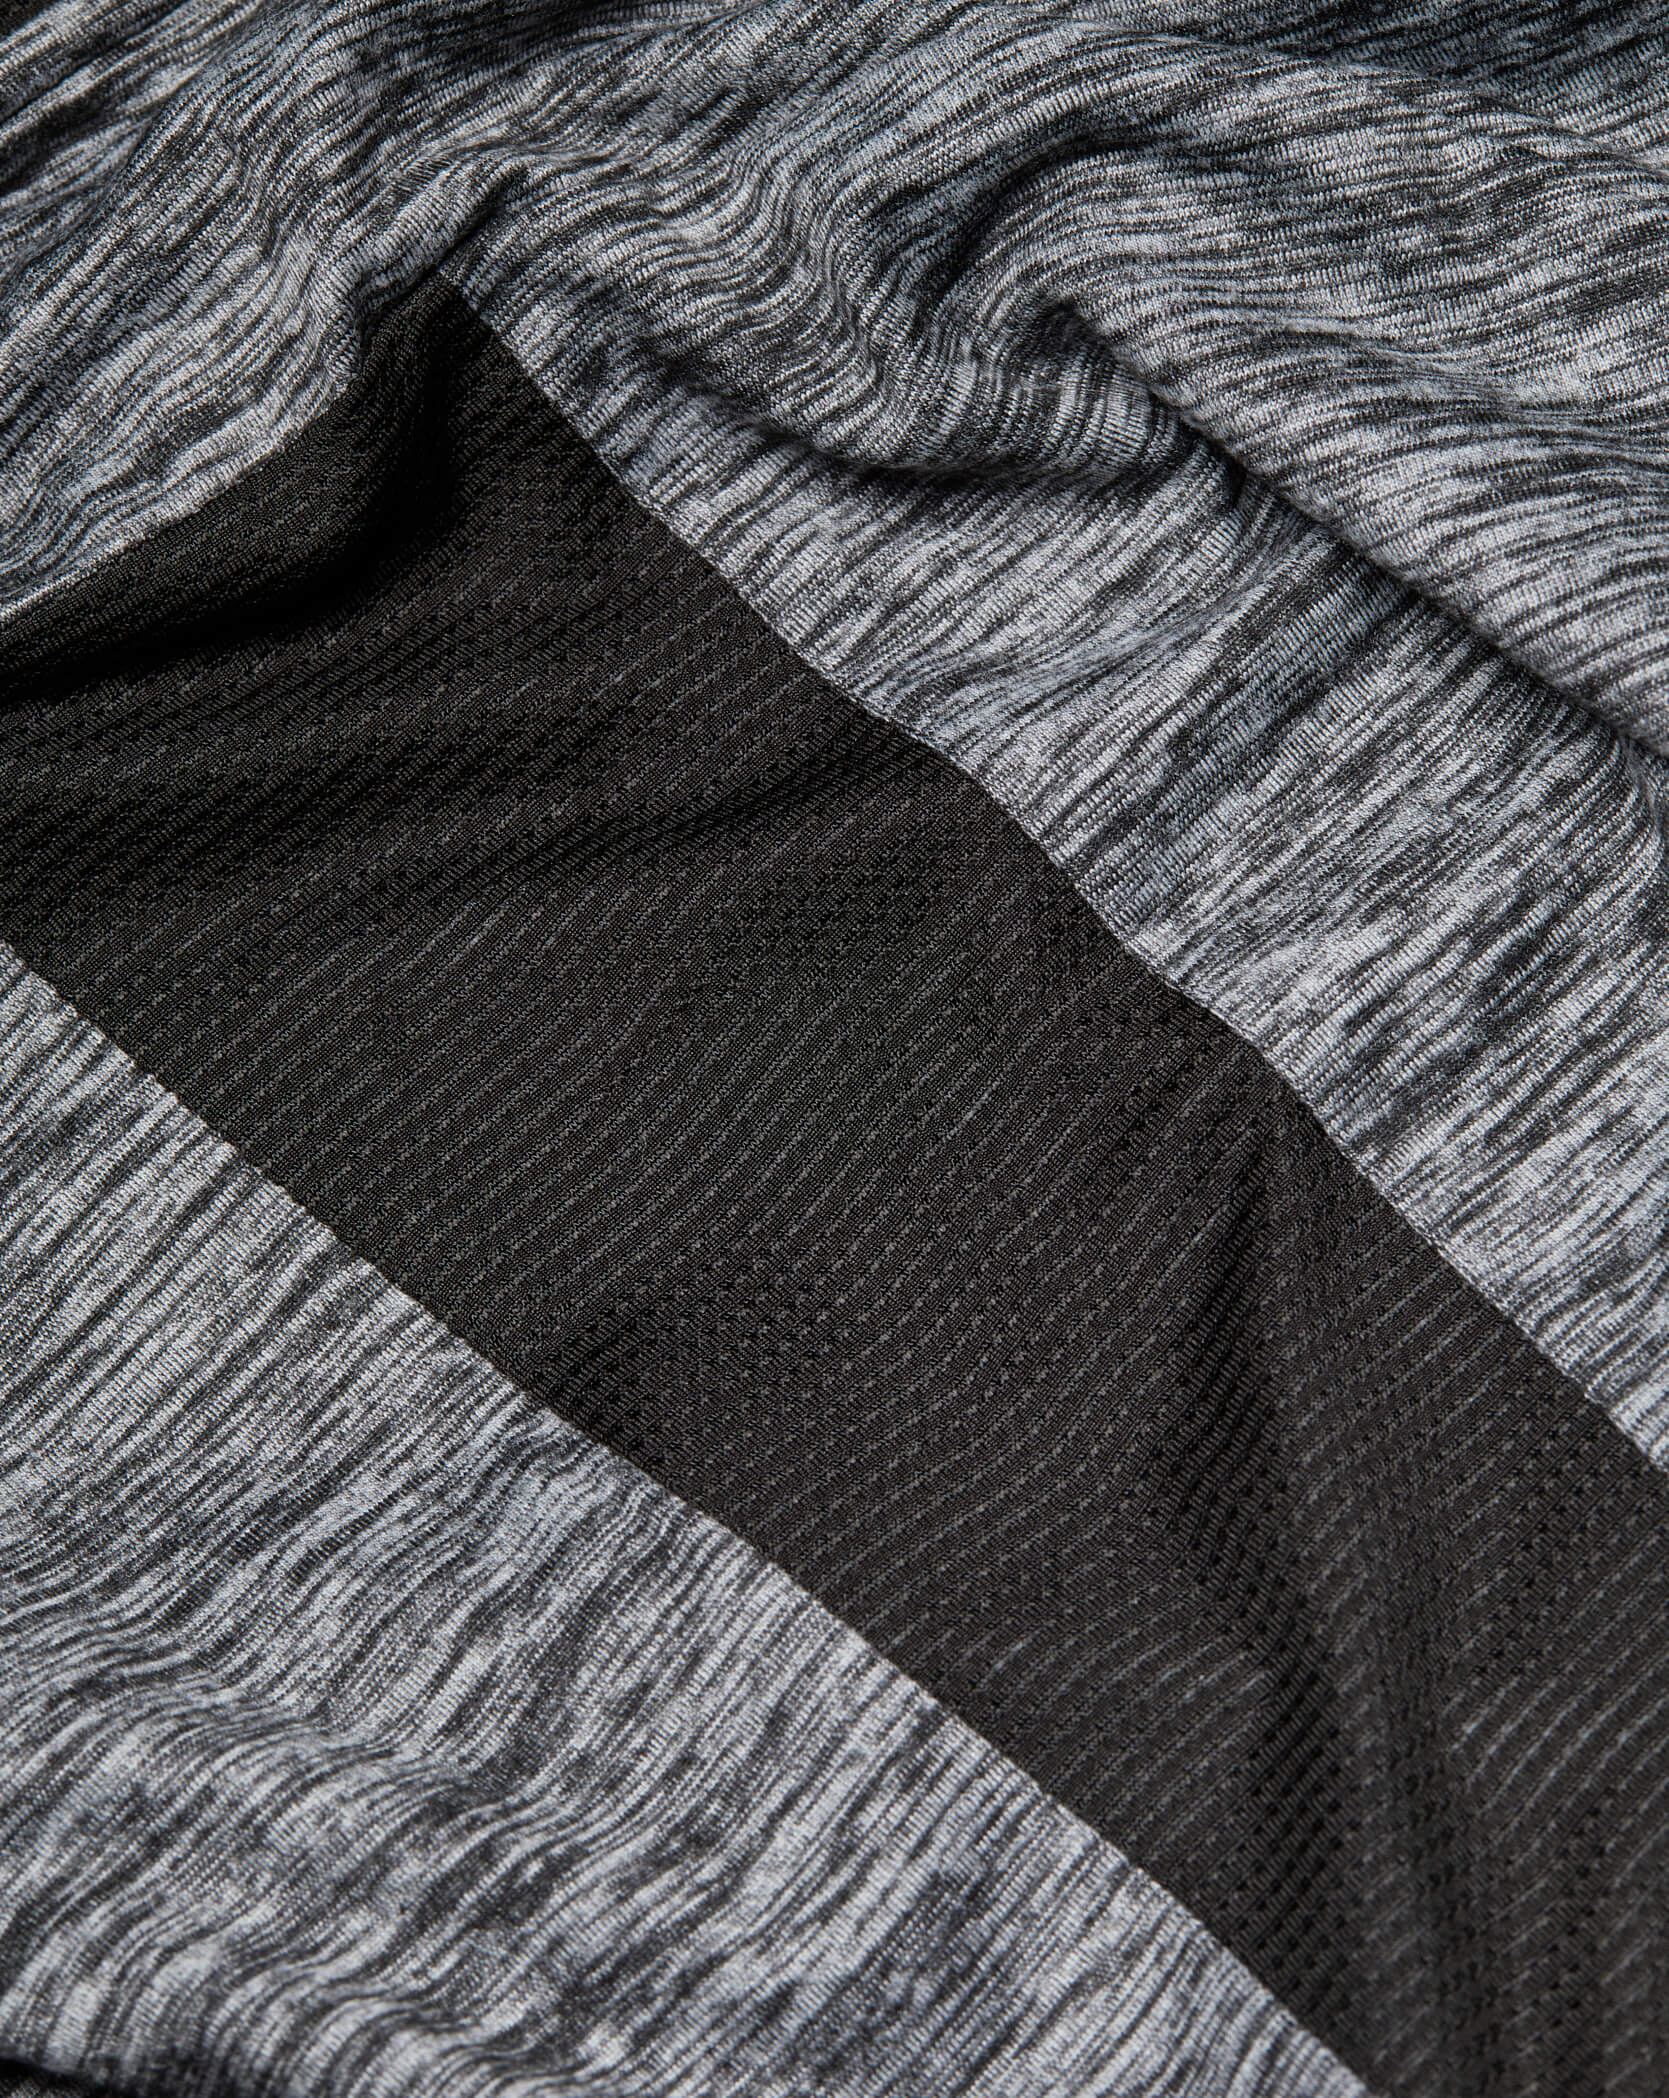 Grey and black Twinzz long sleeve active tee mesh